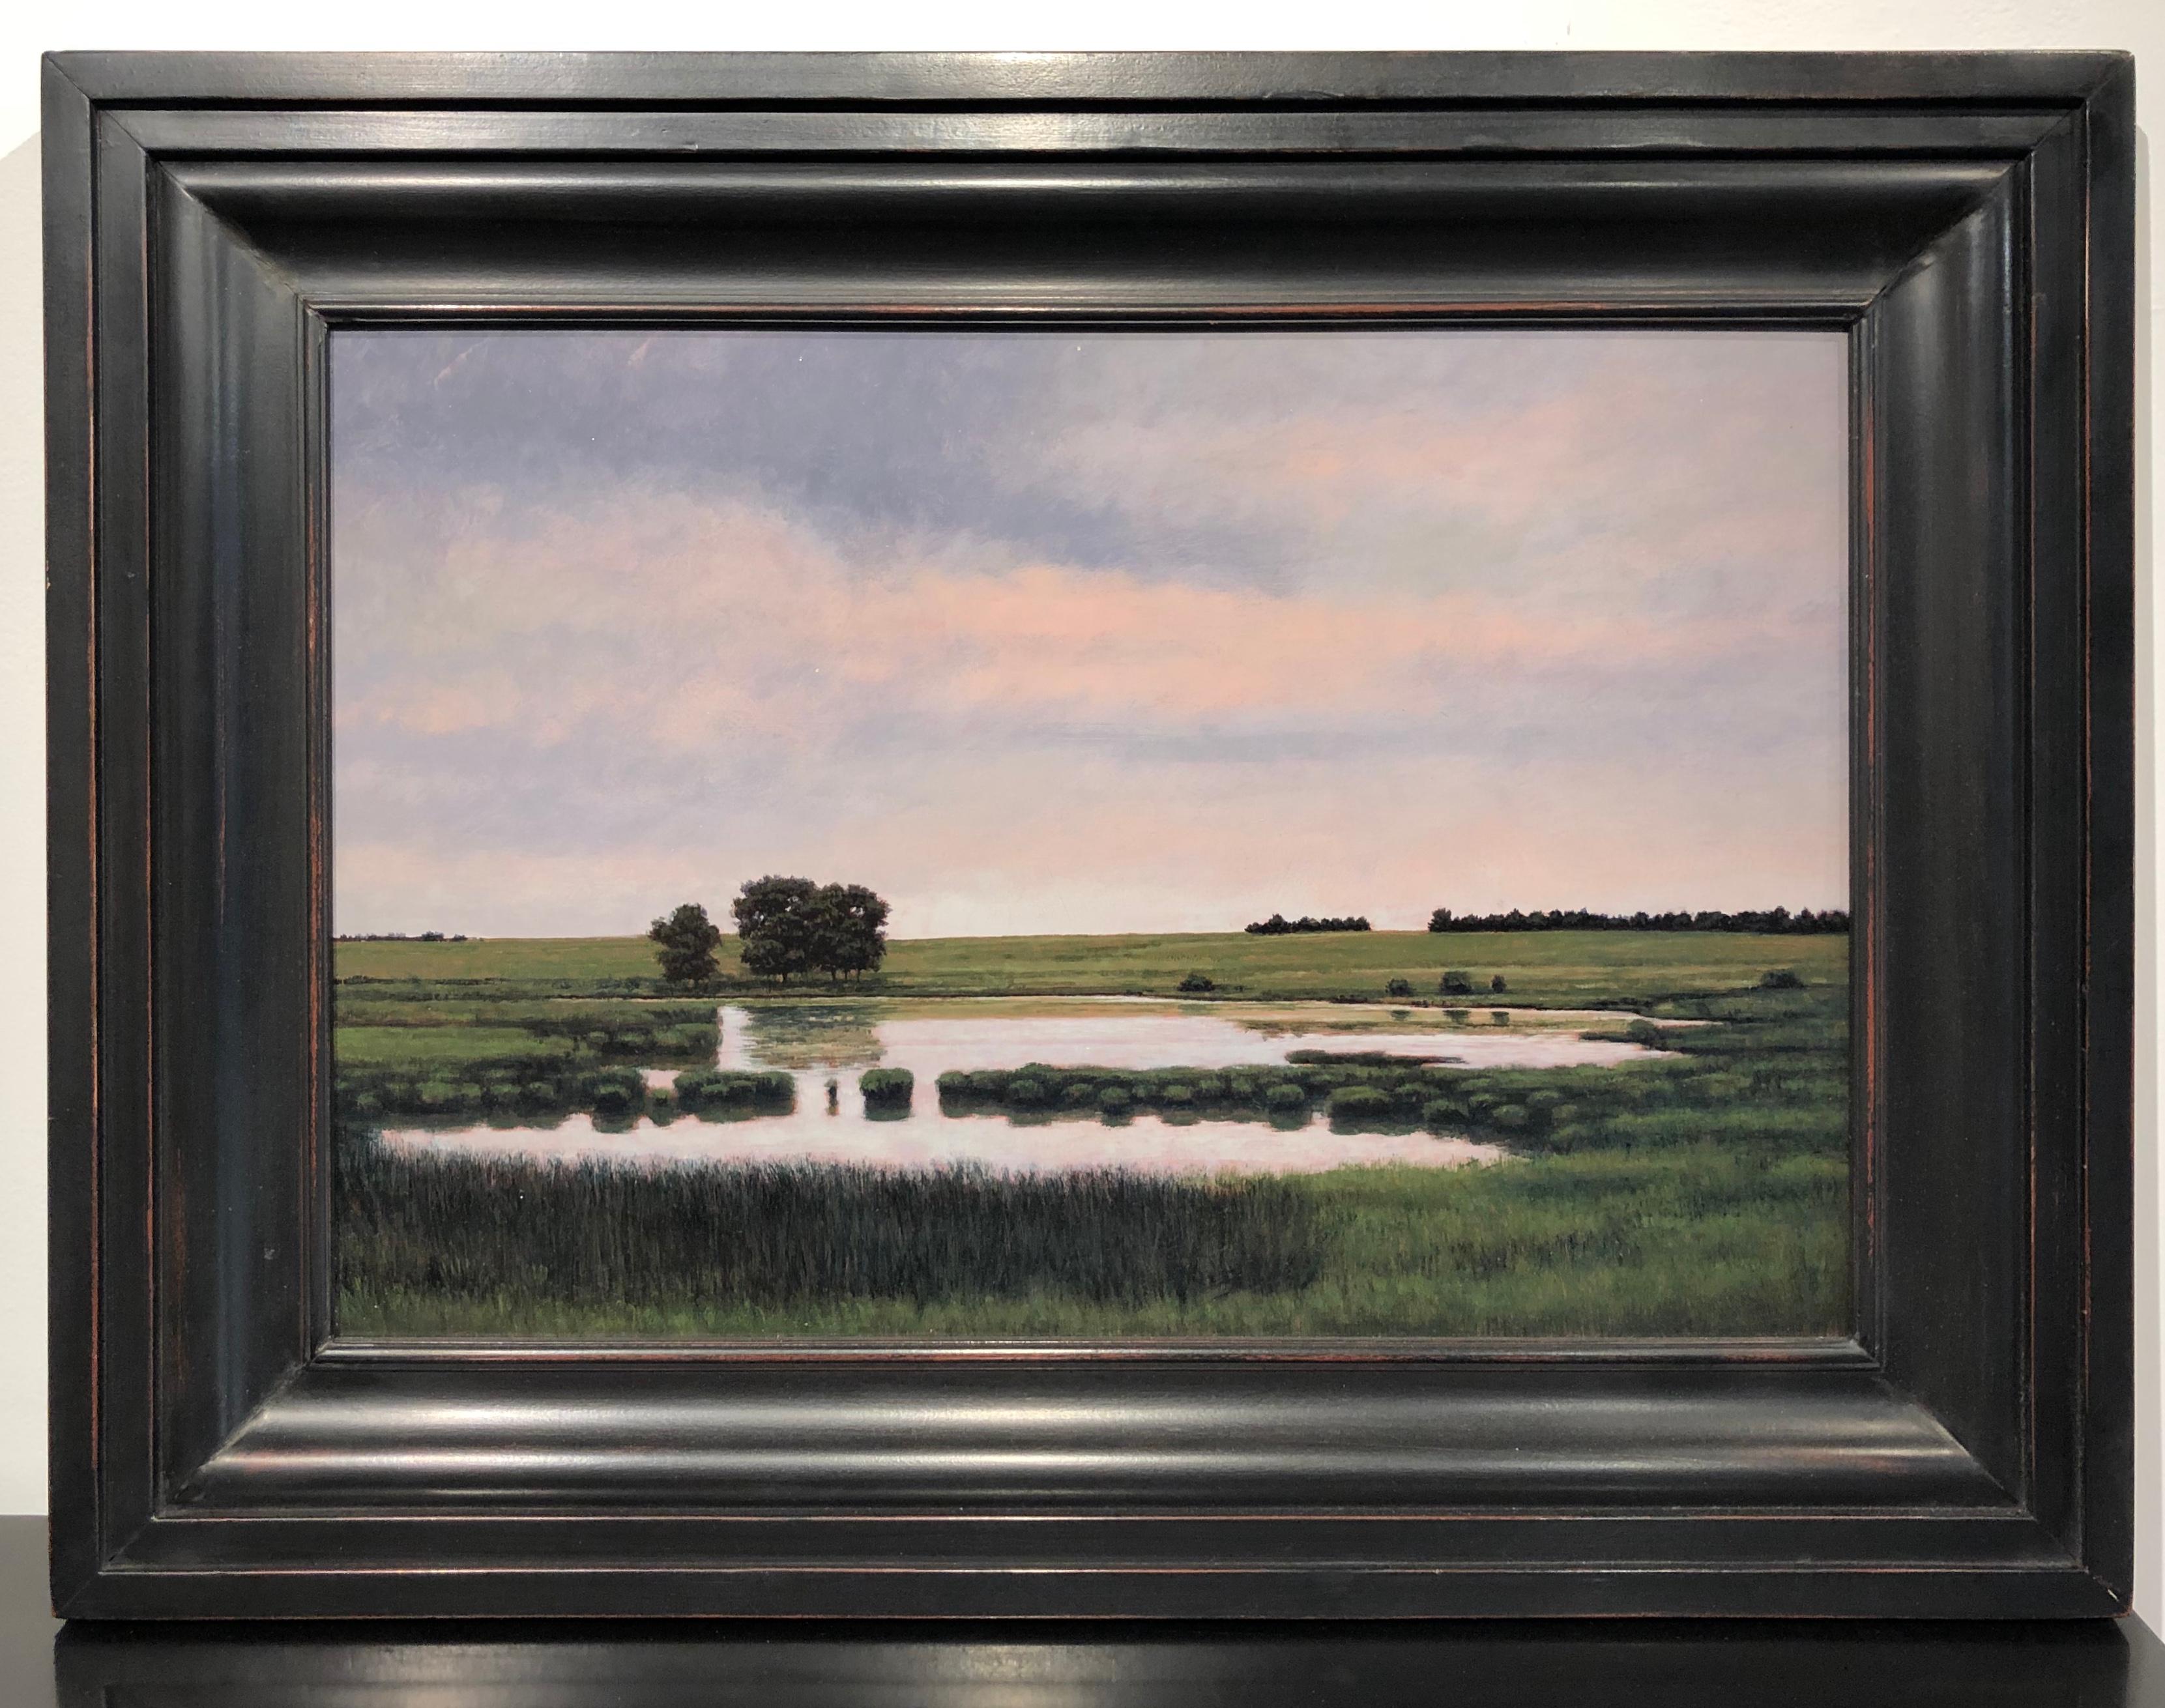 Pond Near St. Cloud, MN -Serene Pastoral Landscape with Meandering Water, Framed - Painting by Jeff Aeling